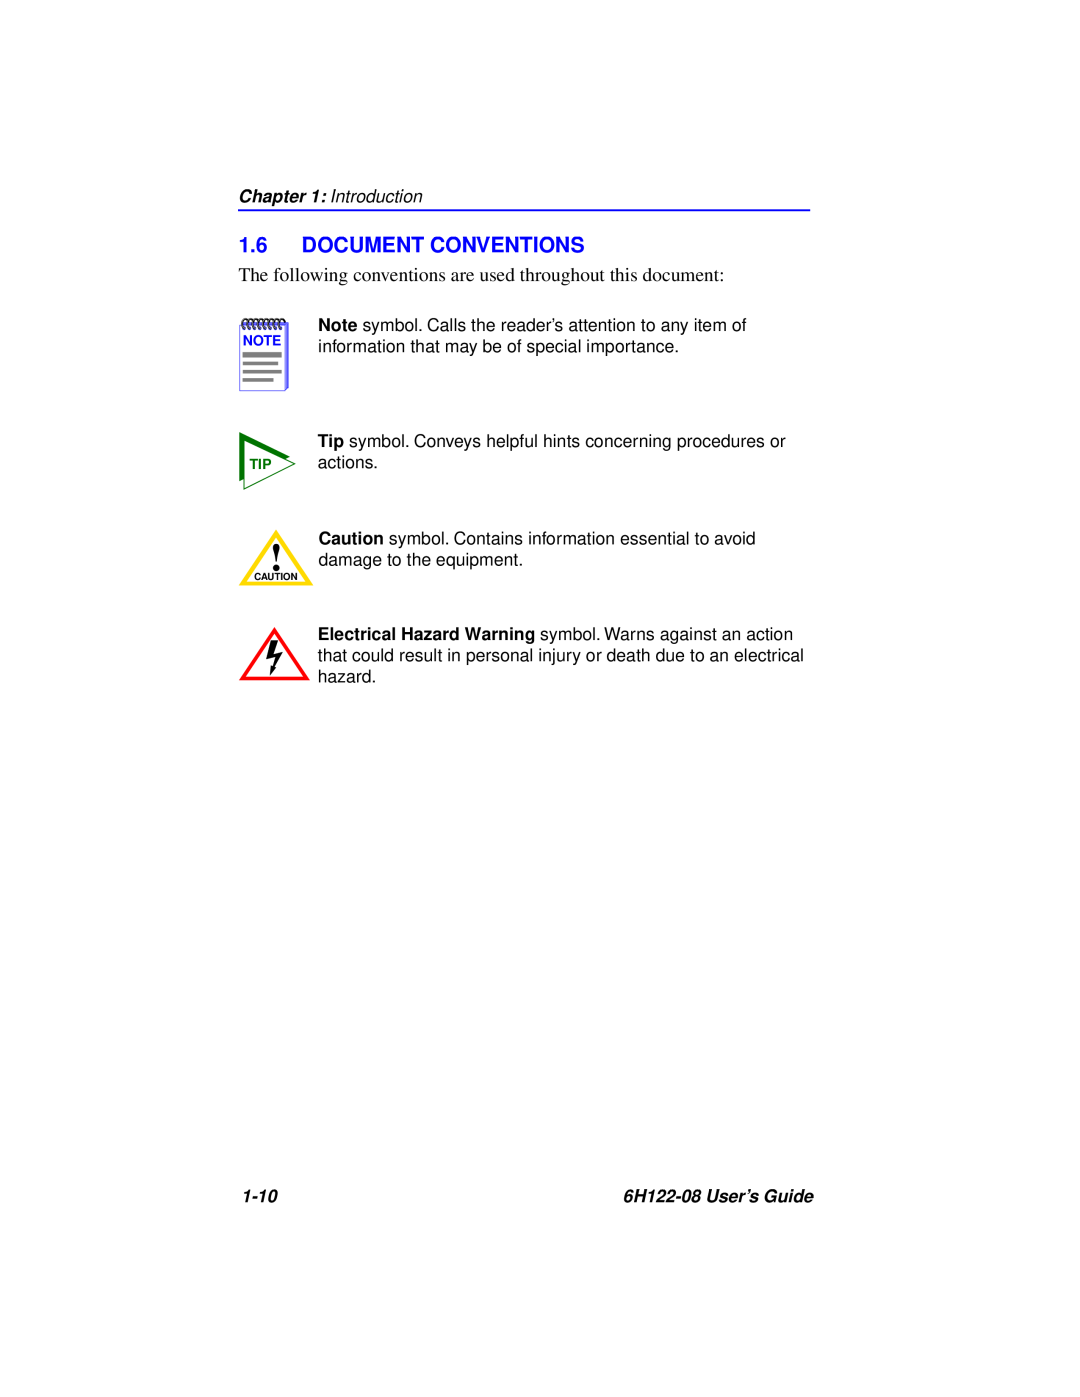 Cabletron Systems 6H122-08 Document Conventions, The following conventions are used throughout this document, Introduction 